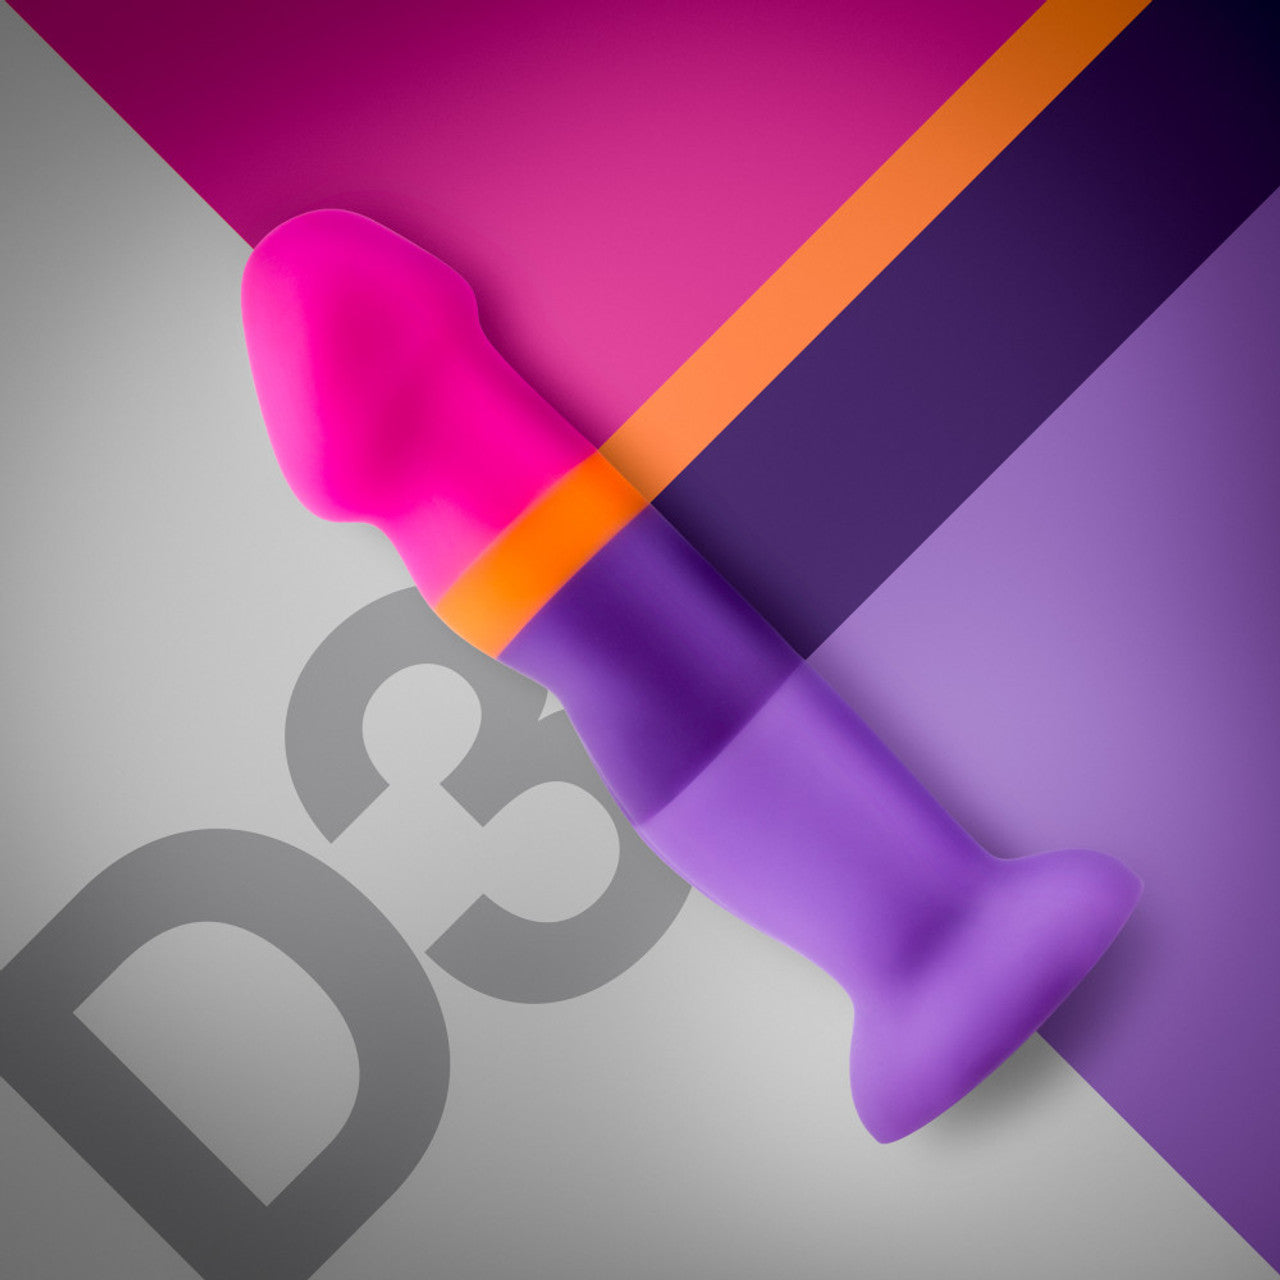 Avant D3 Summer Fling Silicone Dildo - Thorn & Feather